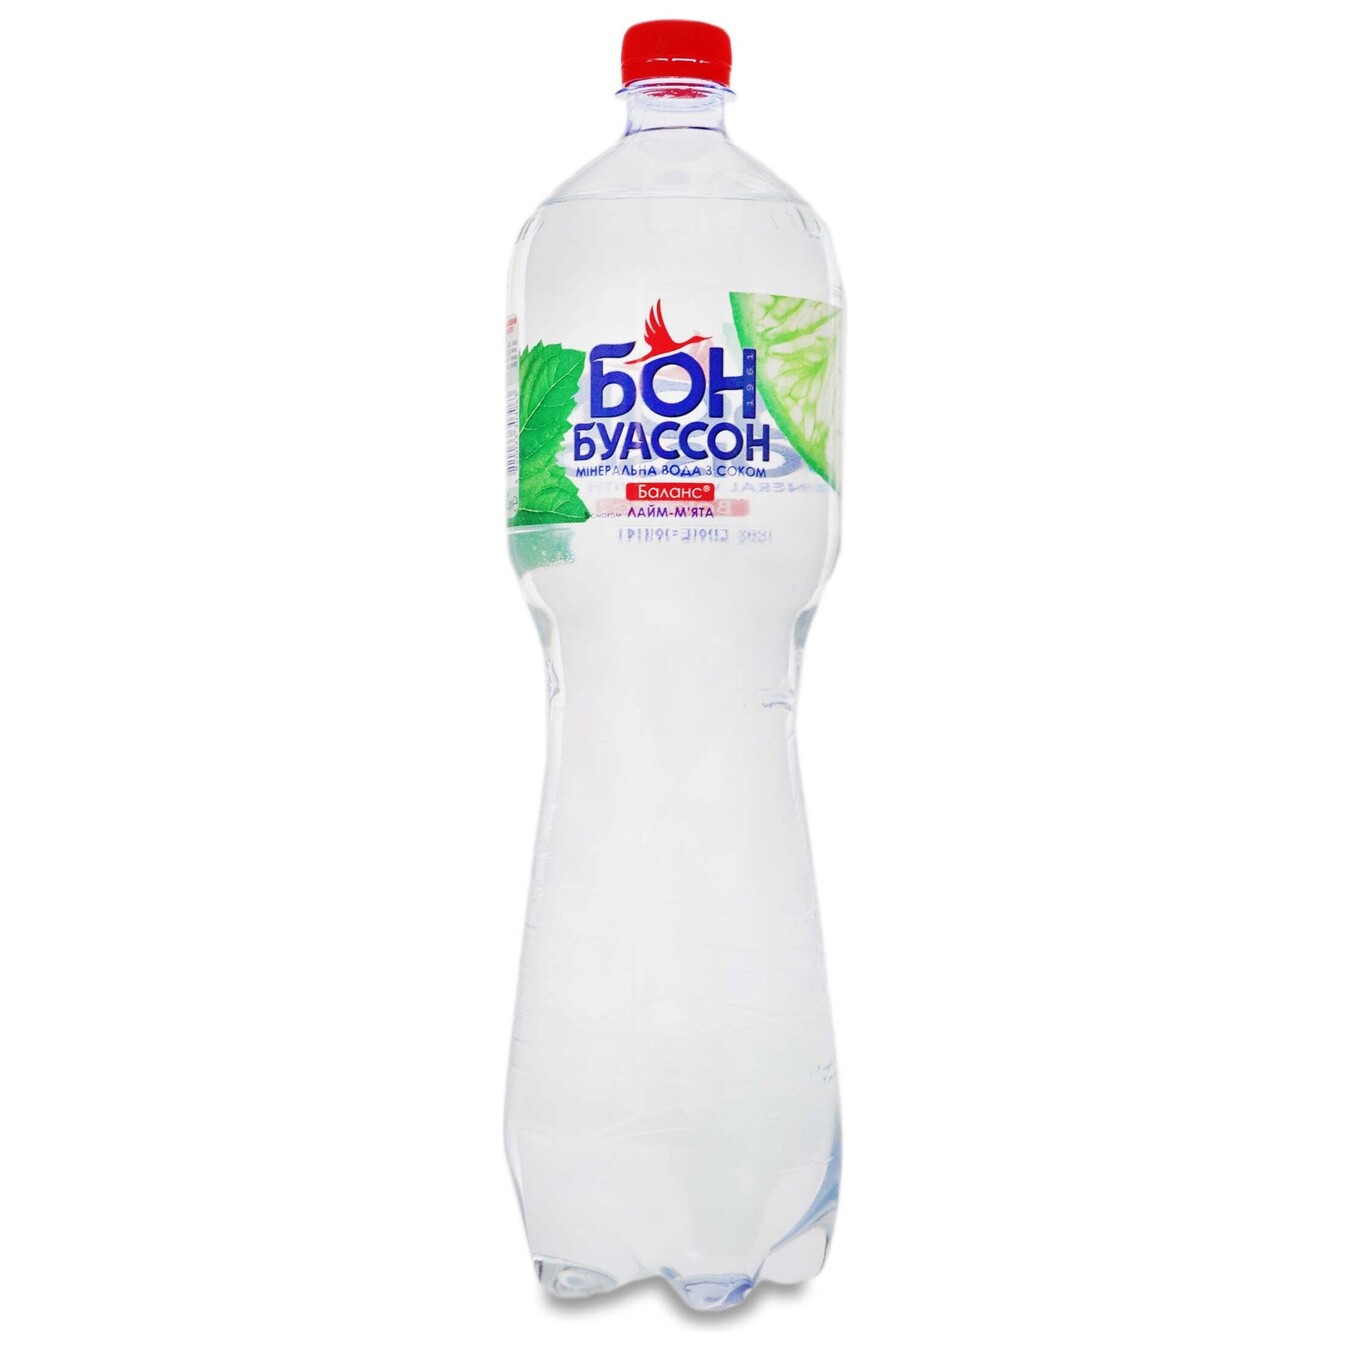 Bon Boisson strongly carbonated mineral water with mint lime juice 1.5 l